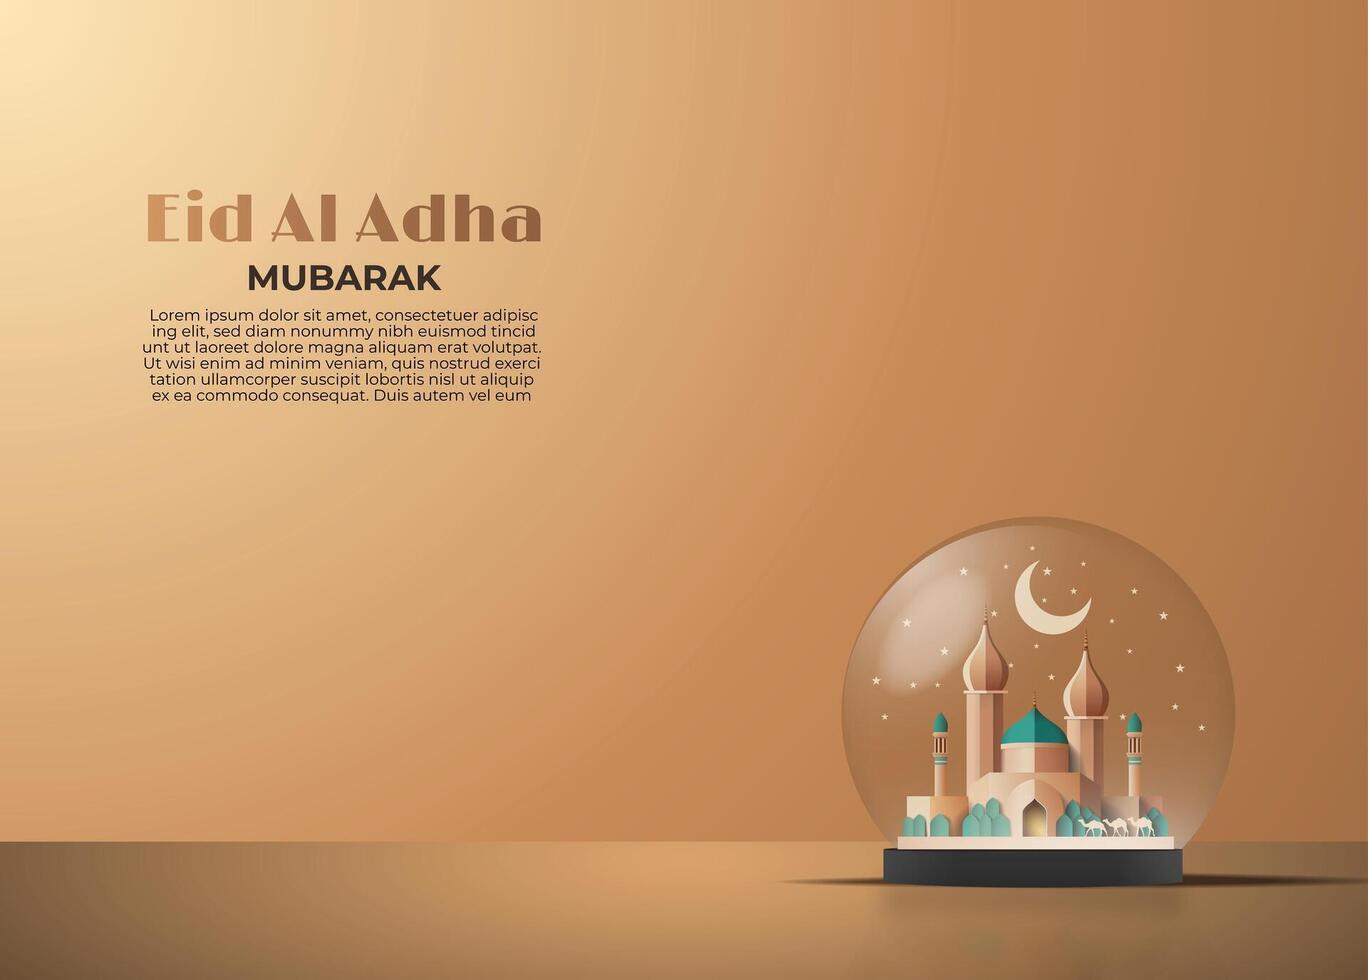 eid al adha mubarak greeting card with a mosque in a crystal ball 3d vector illustration